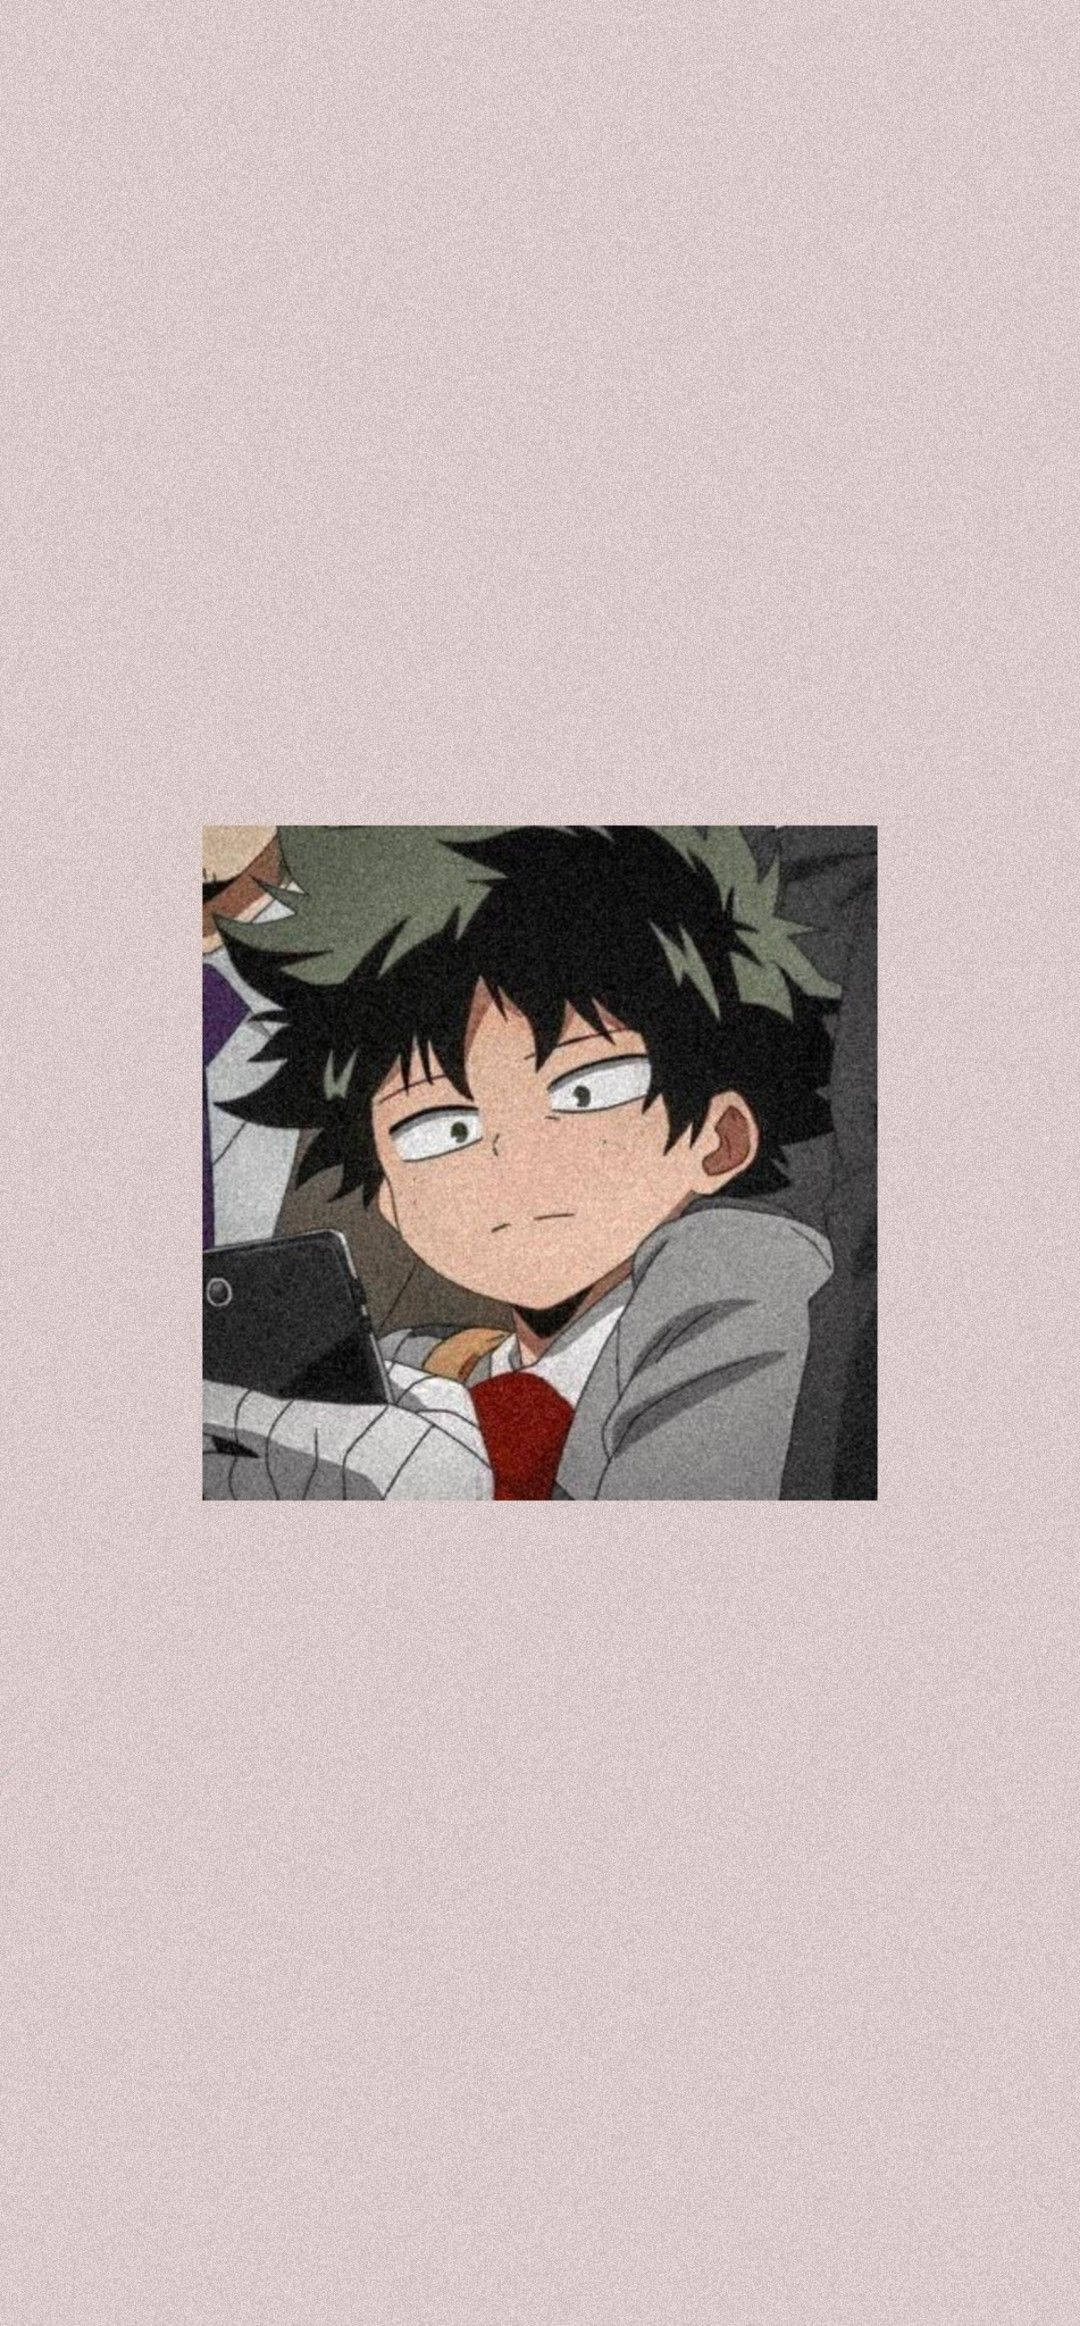 A picture of anime character with his eyes closed - My Hero Academia